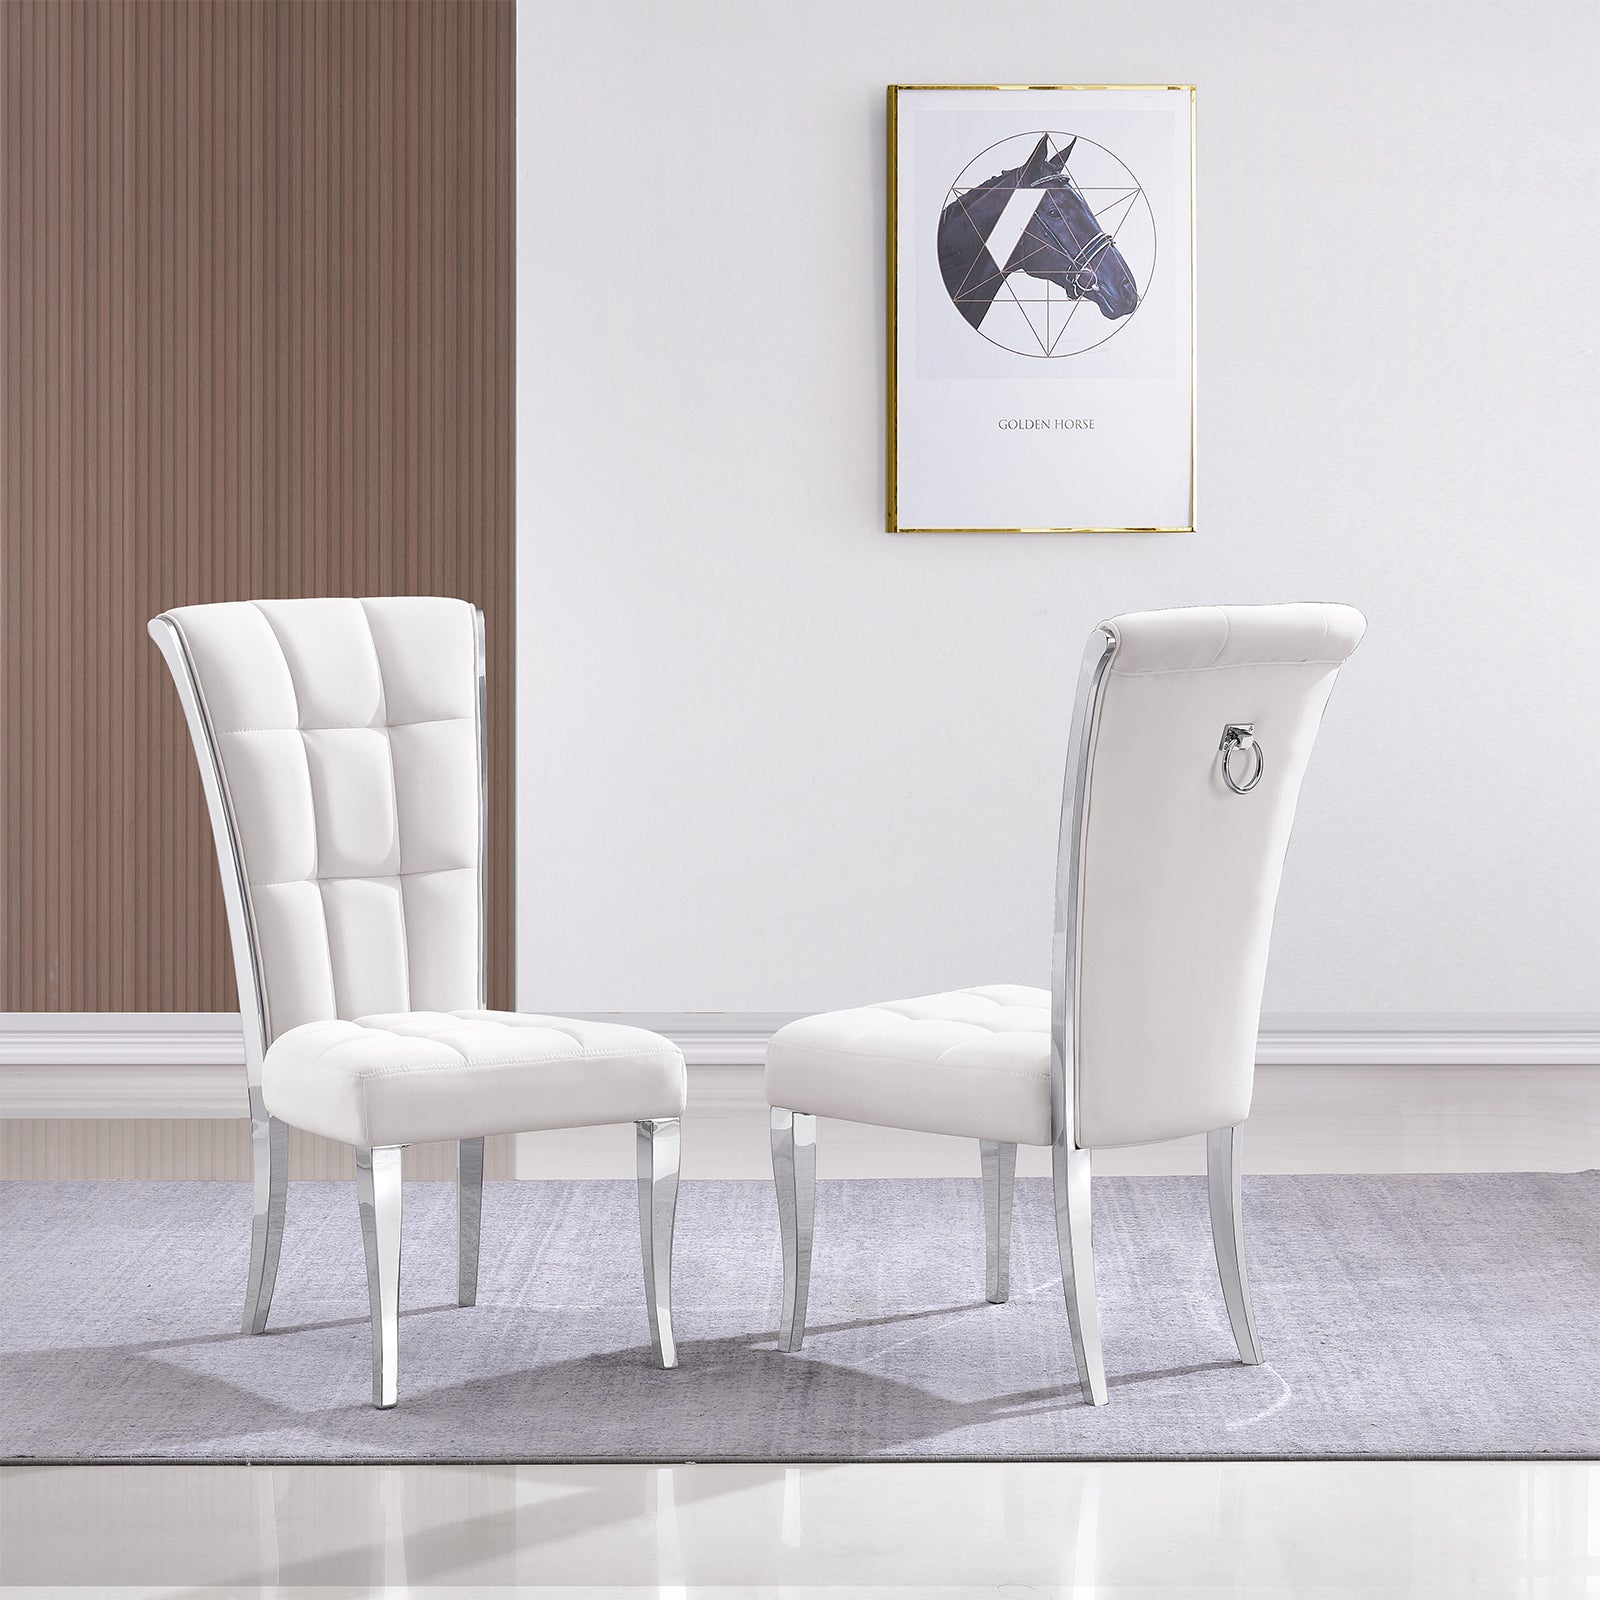 Embrace Elegance with AUZ's White and Silver Dining Chairs